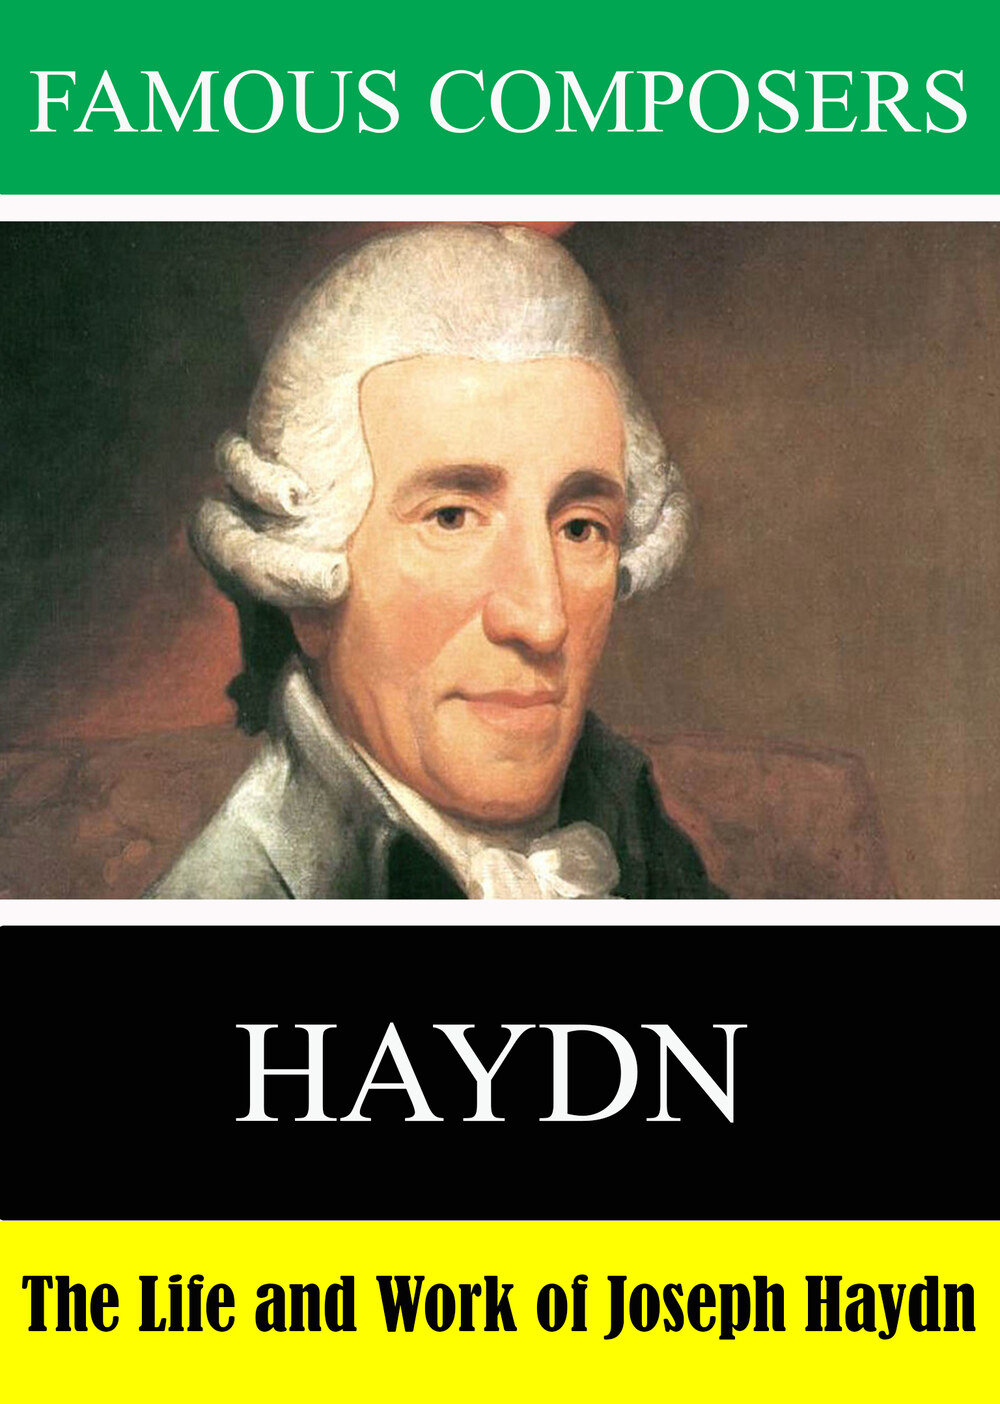 L7922 - Famous Composers: The Life and Work of Joseph Haydn